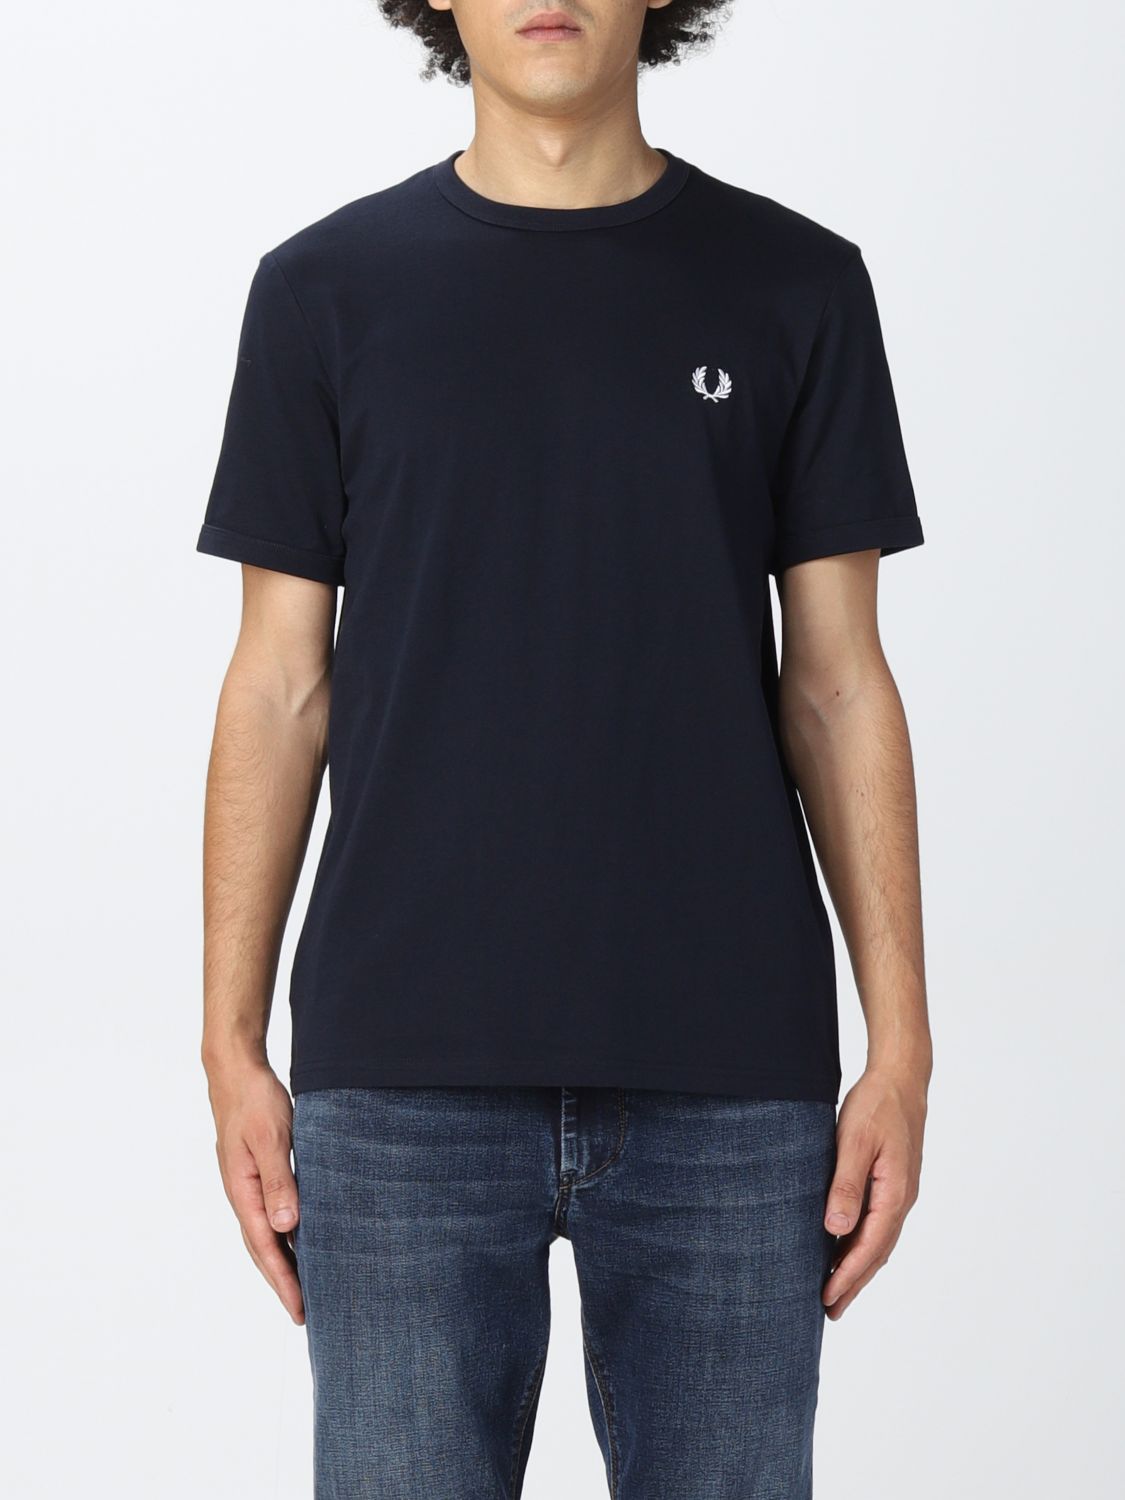 Tシャツ Fred Perry: Tシャツ Fred Perry メンズ ネイビー 1